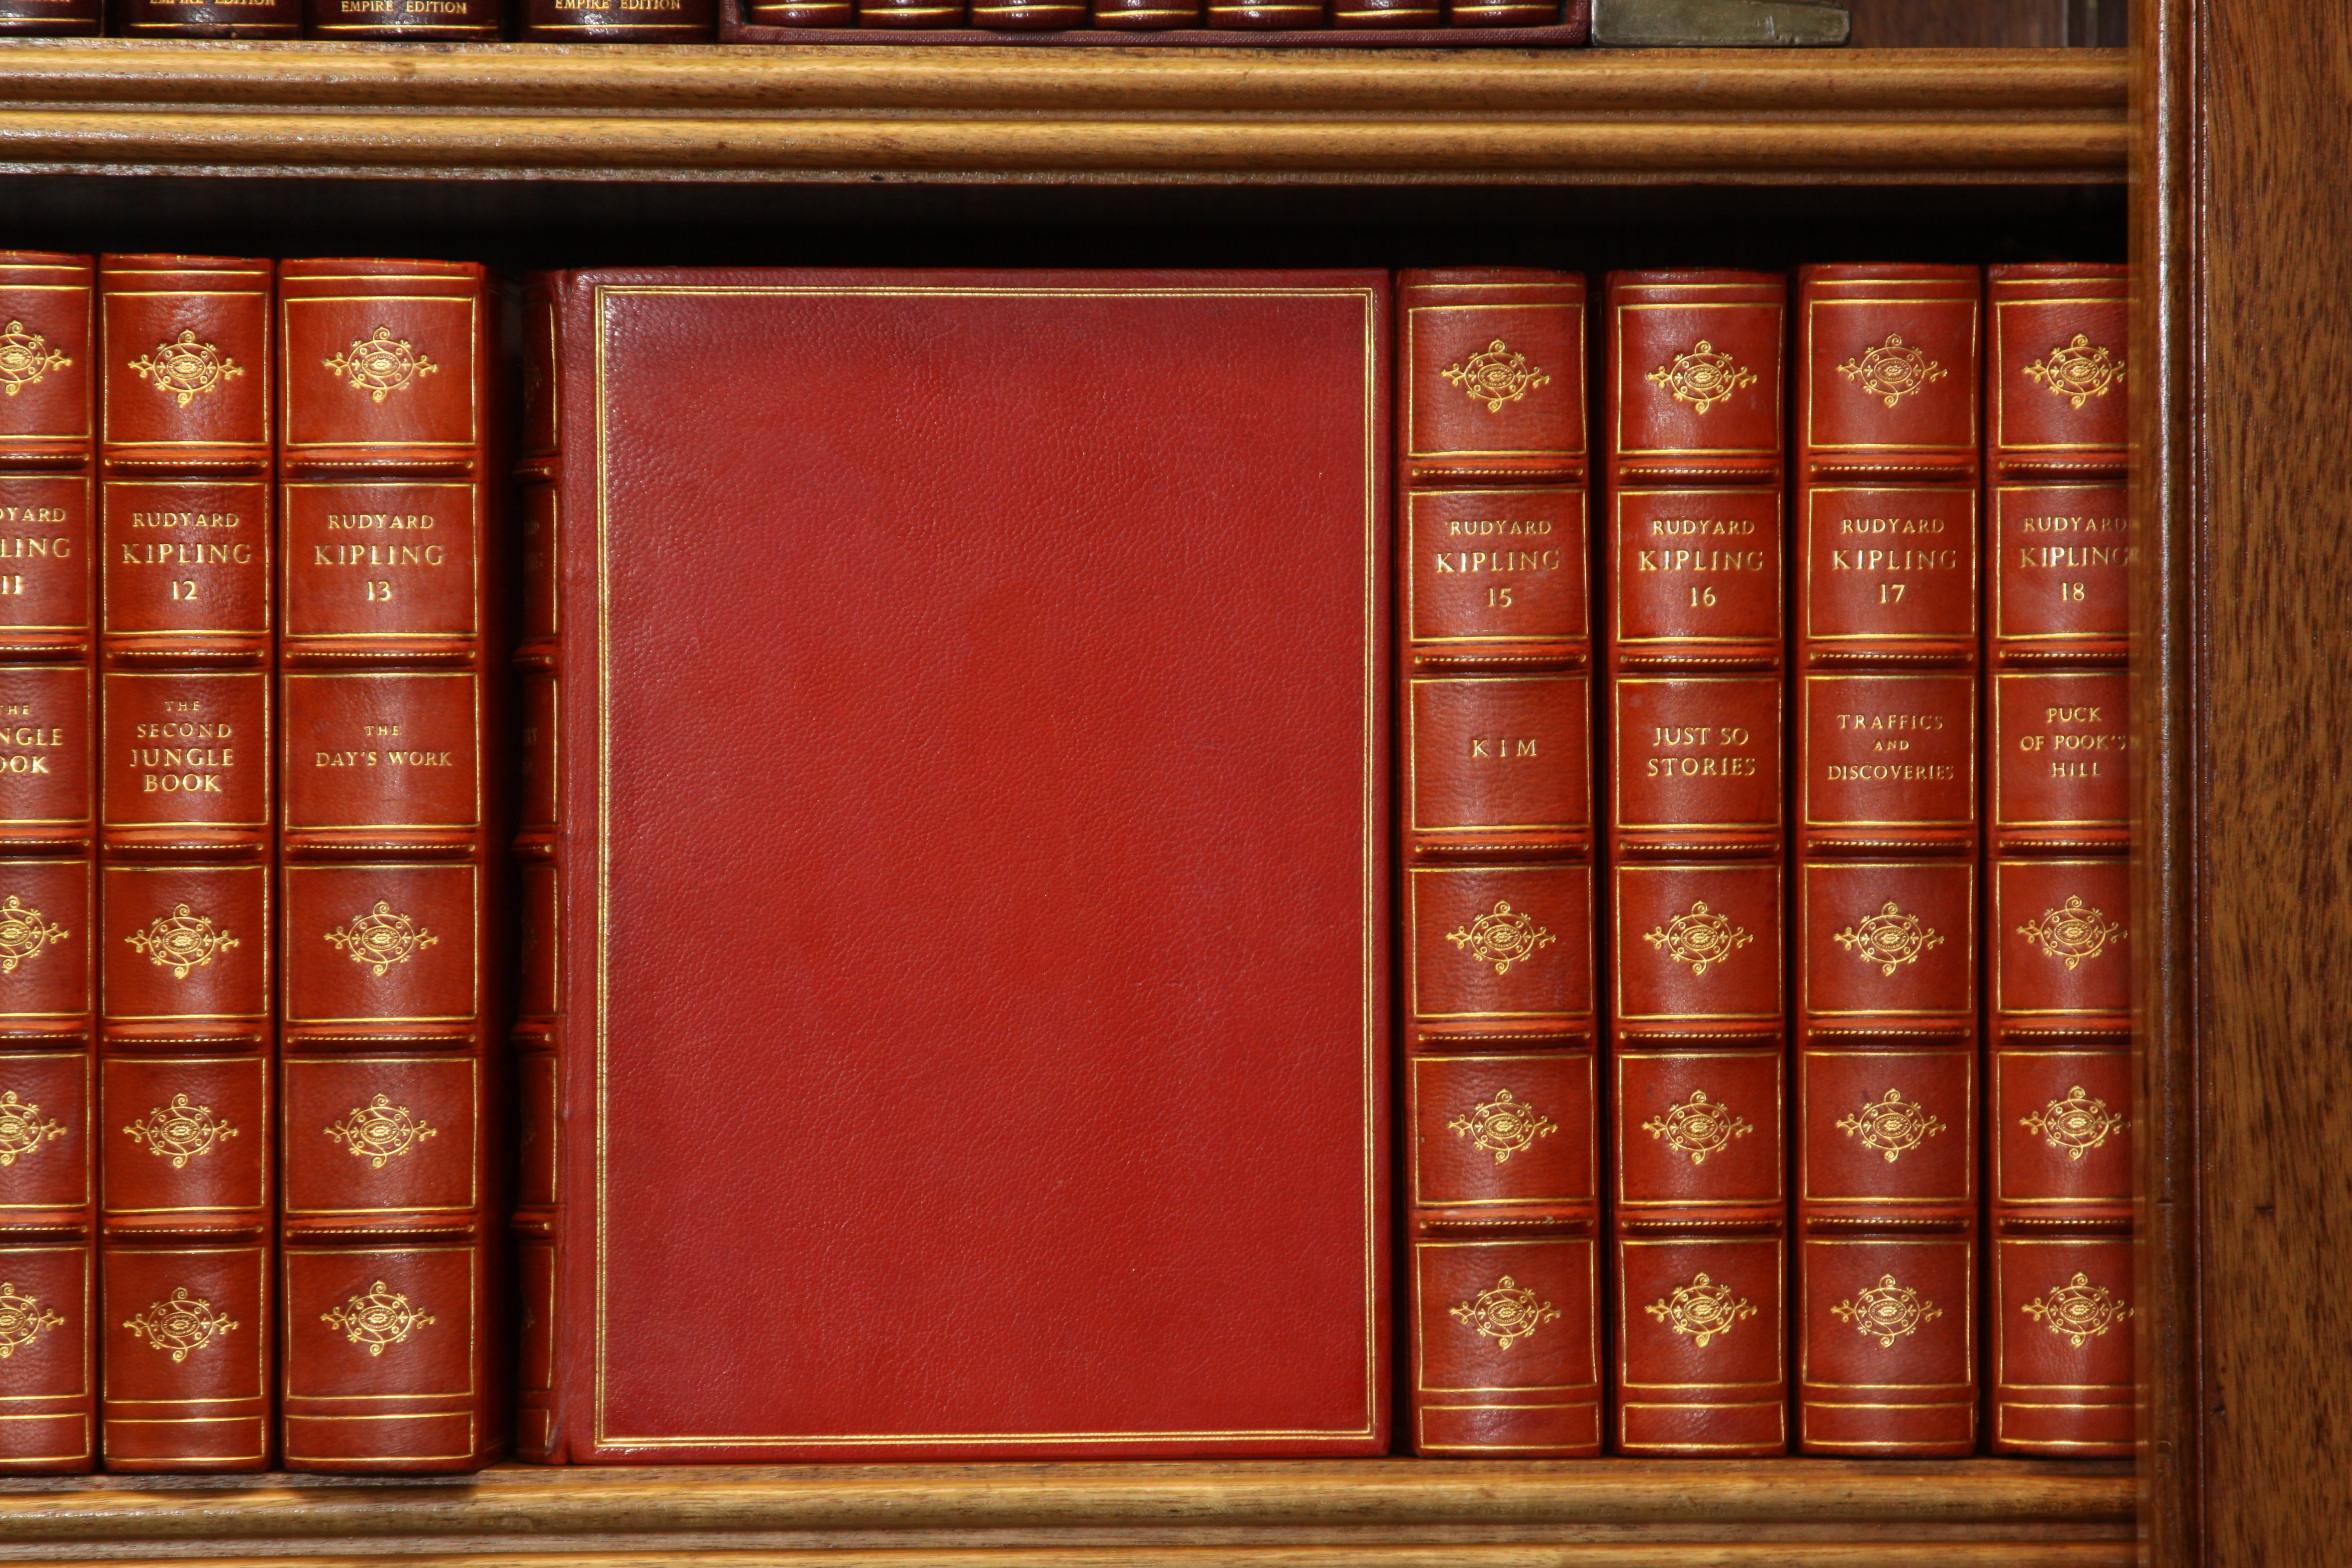 Thirty-one volumes. The Bombay Edition of the Writings of Rudyard Kipling. Published: London, Macmillan and Company, 1913. Limited to 1050 copies and printed on the Florence Press TYPE, which handmade paper bearing the watermark 